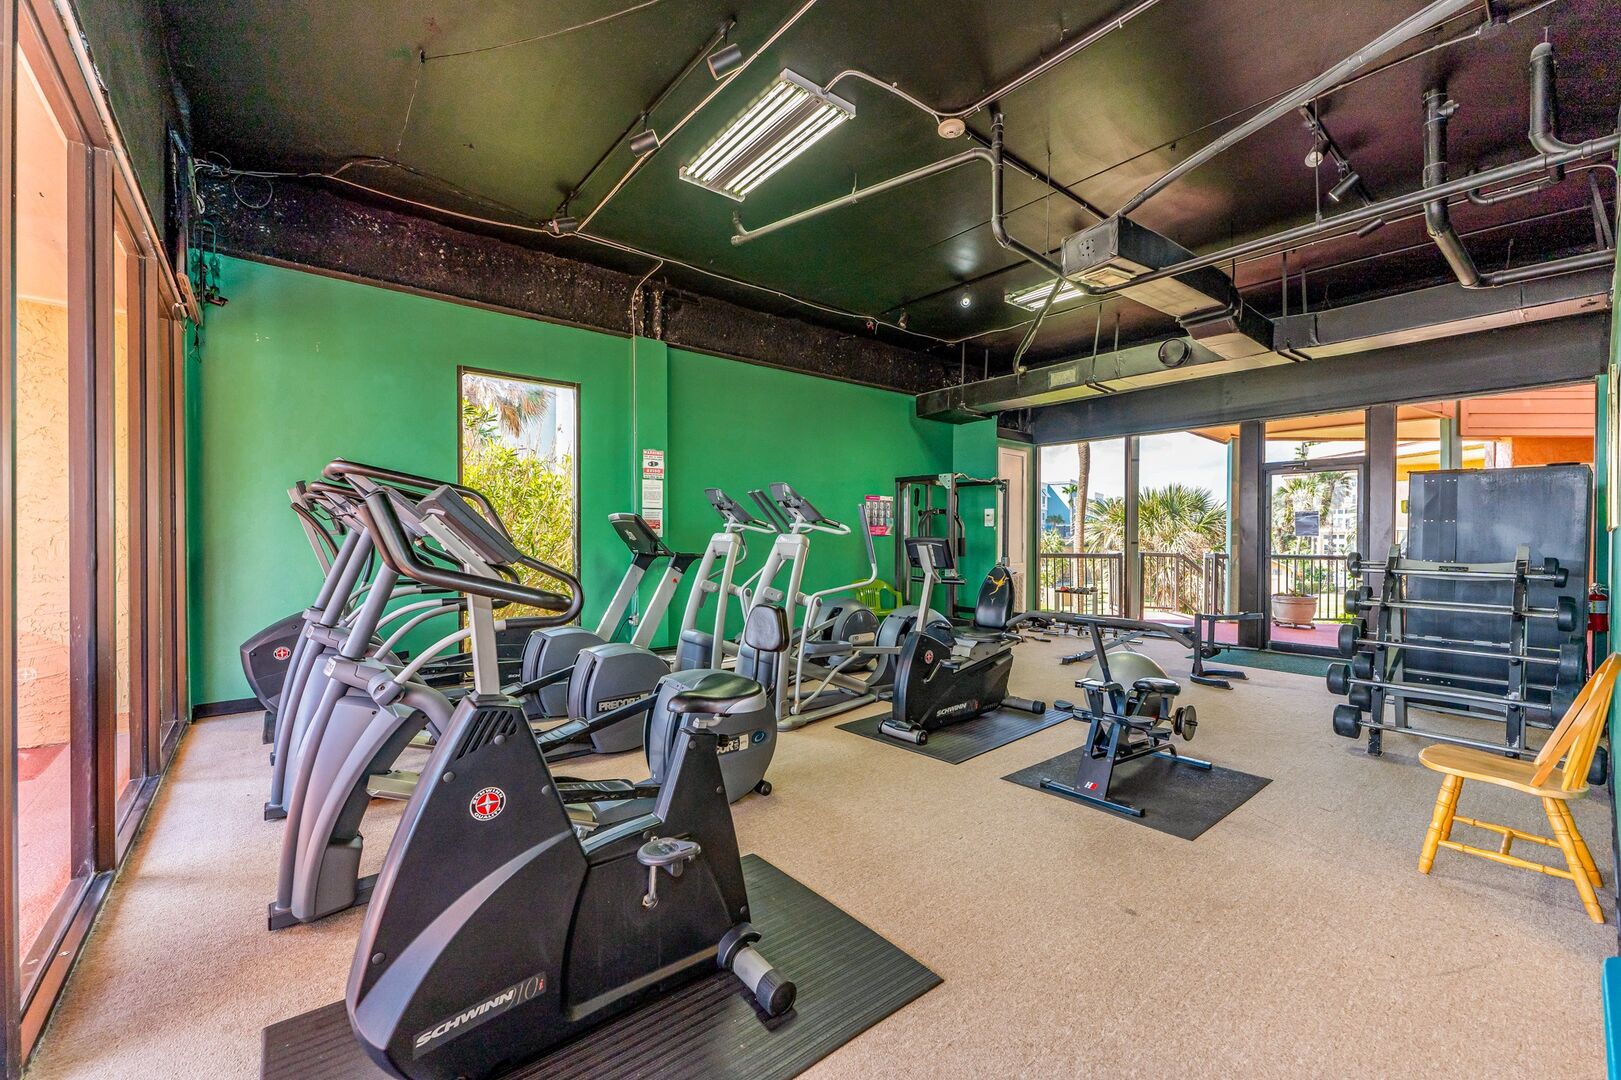 The fitness room overlooks the gulf